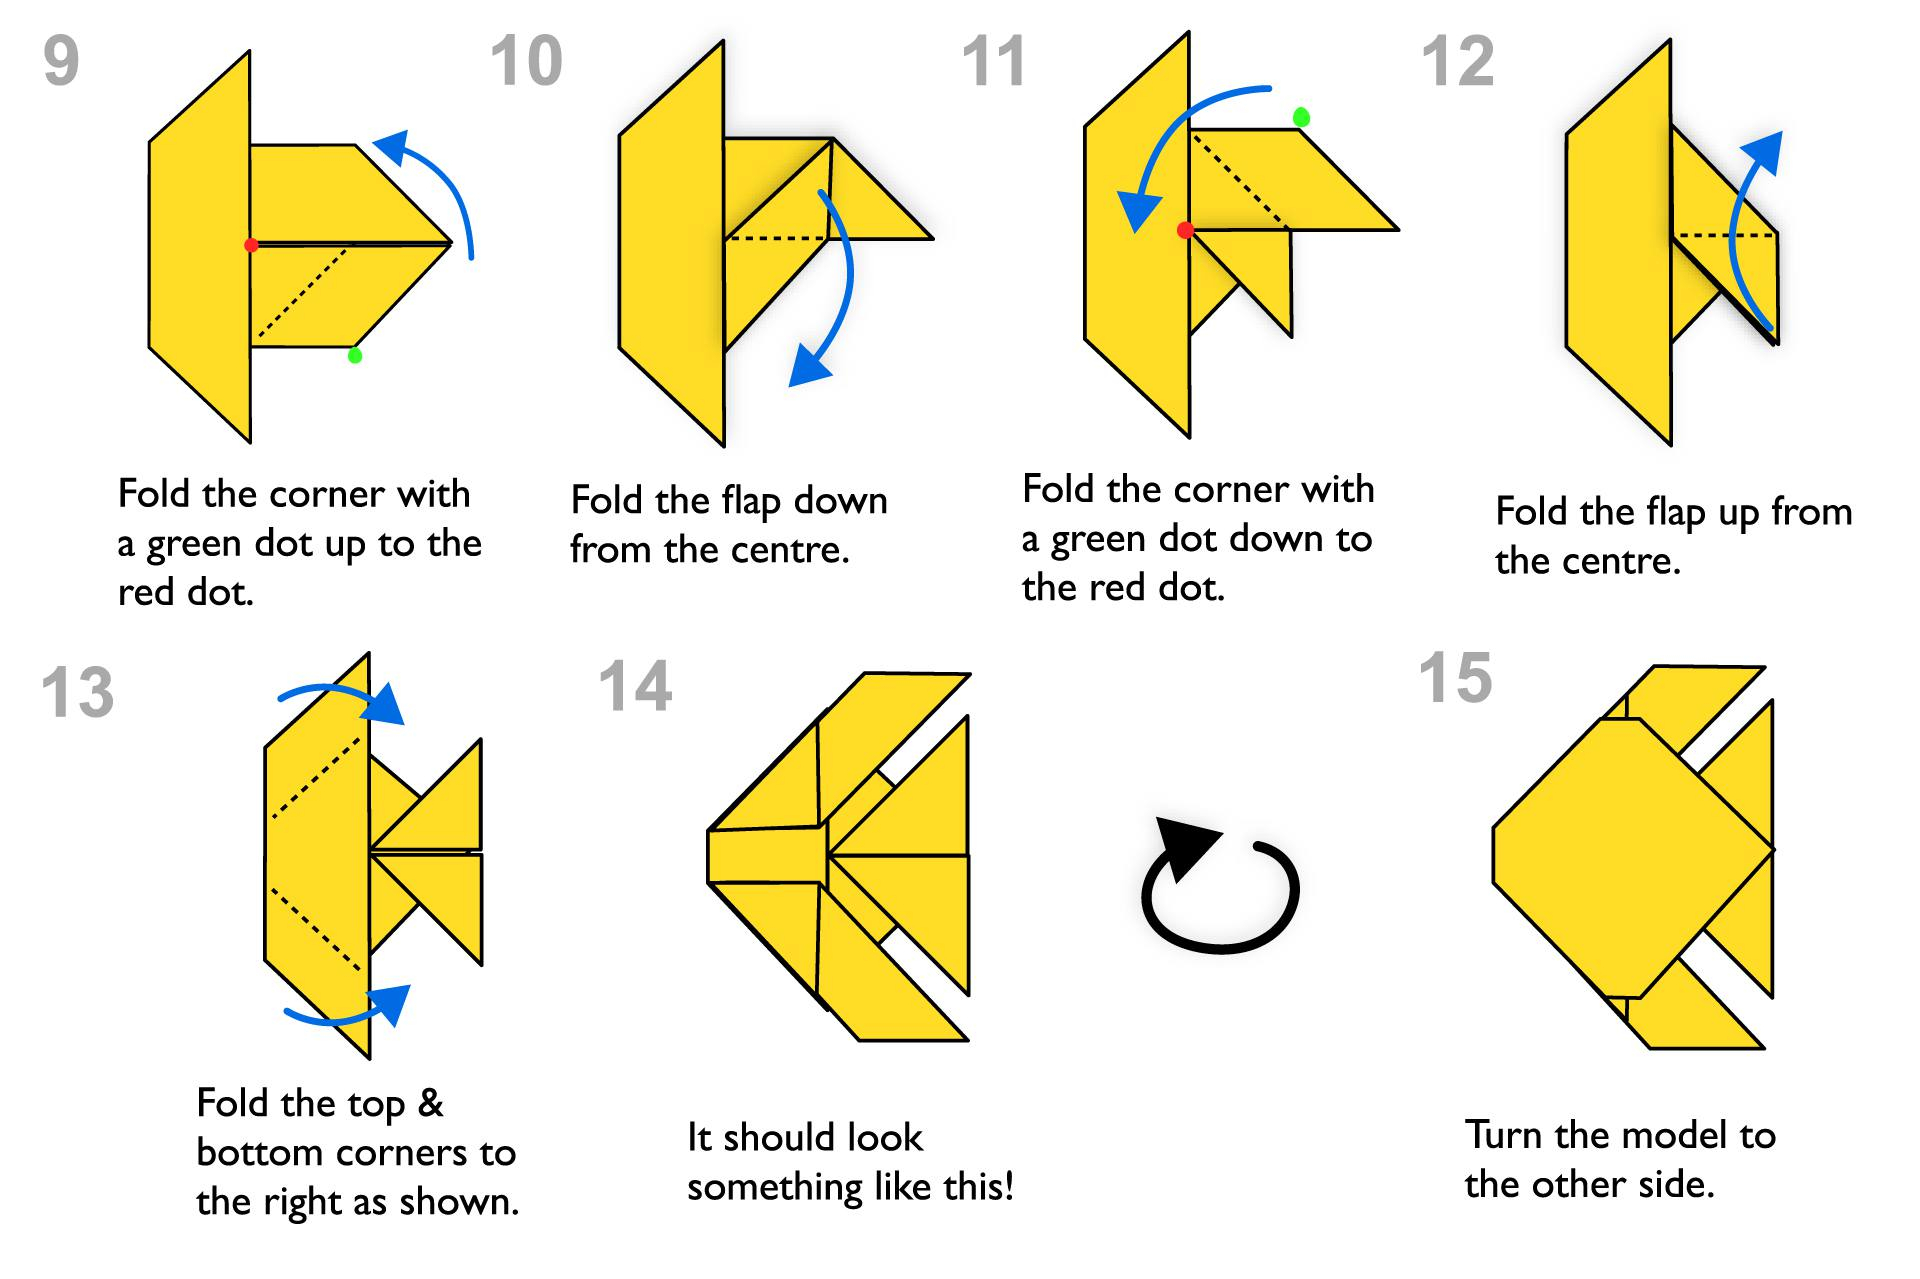 How To Make An Origami Fish Step Step Instructions For Making An Origami Fish